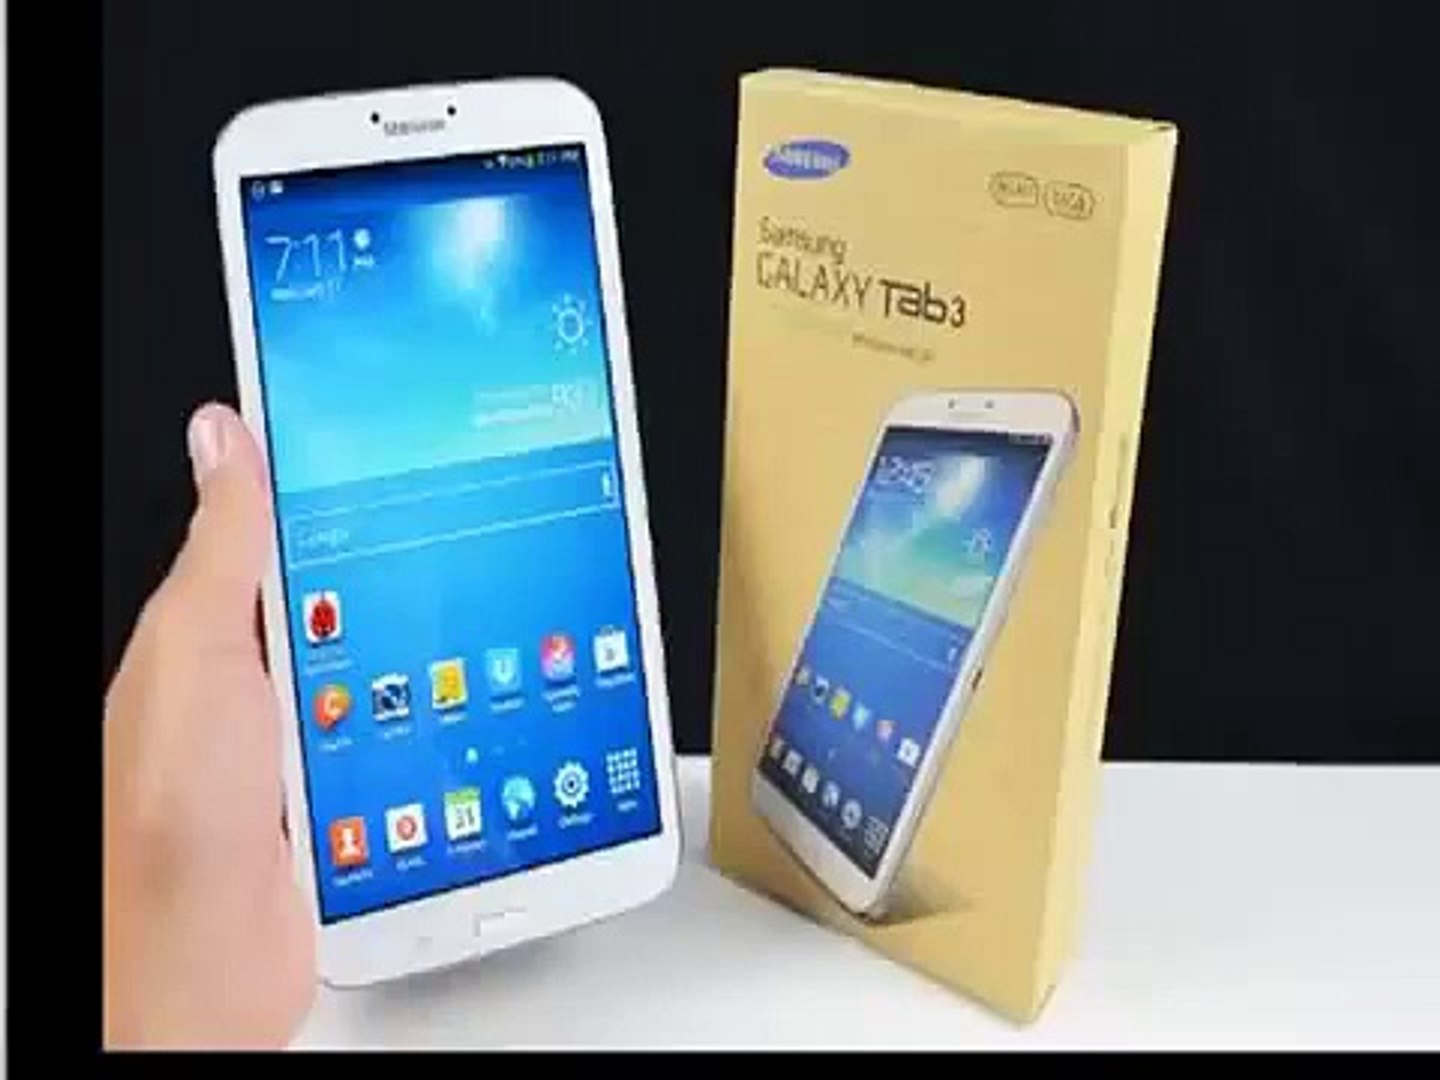 Get Samsung Galaxy Tab 3 8.0 T311 16GB 3G Android 4.2 Tablet PC - White  Best - video Dailymotion